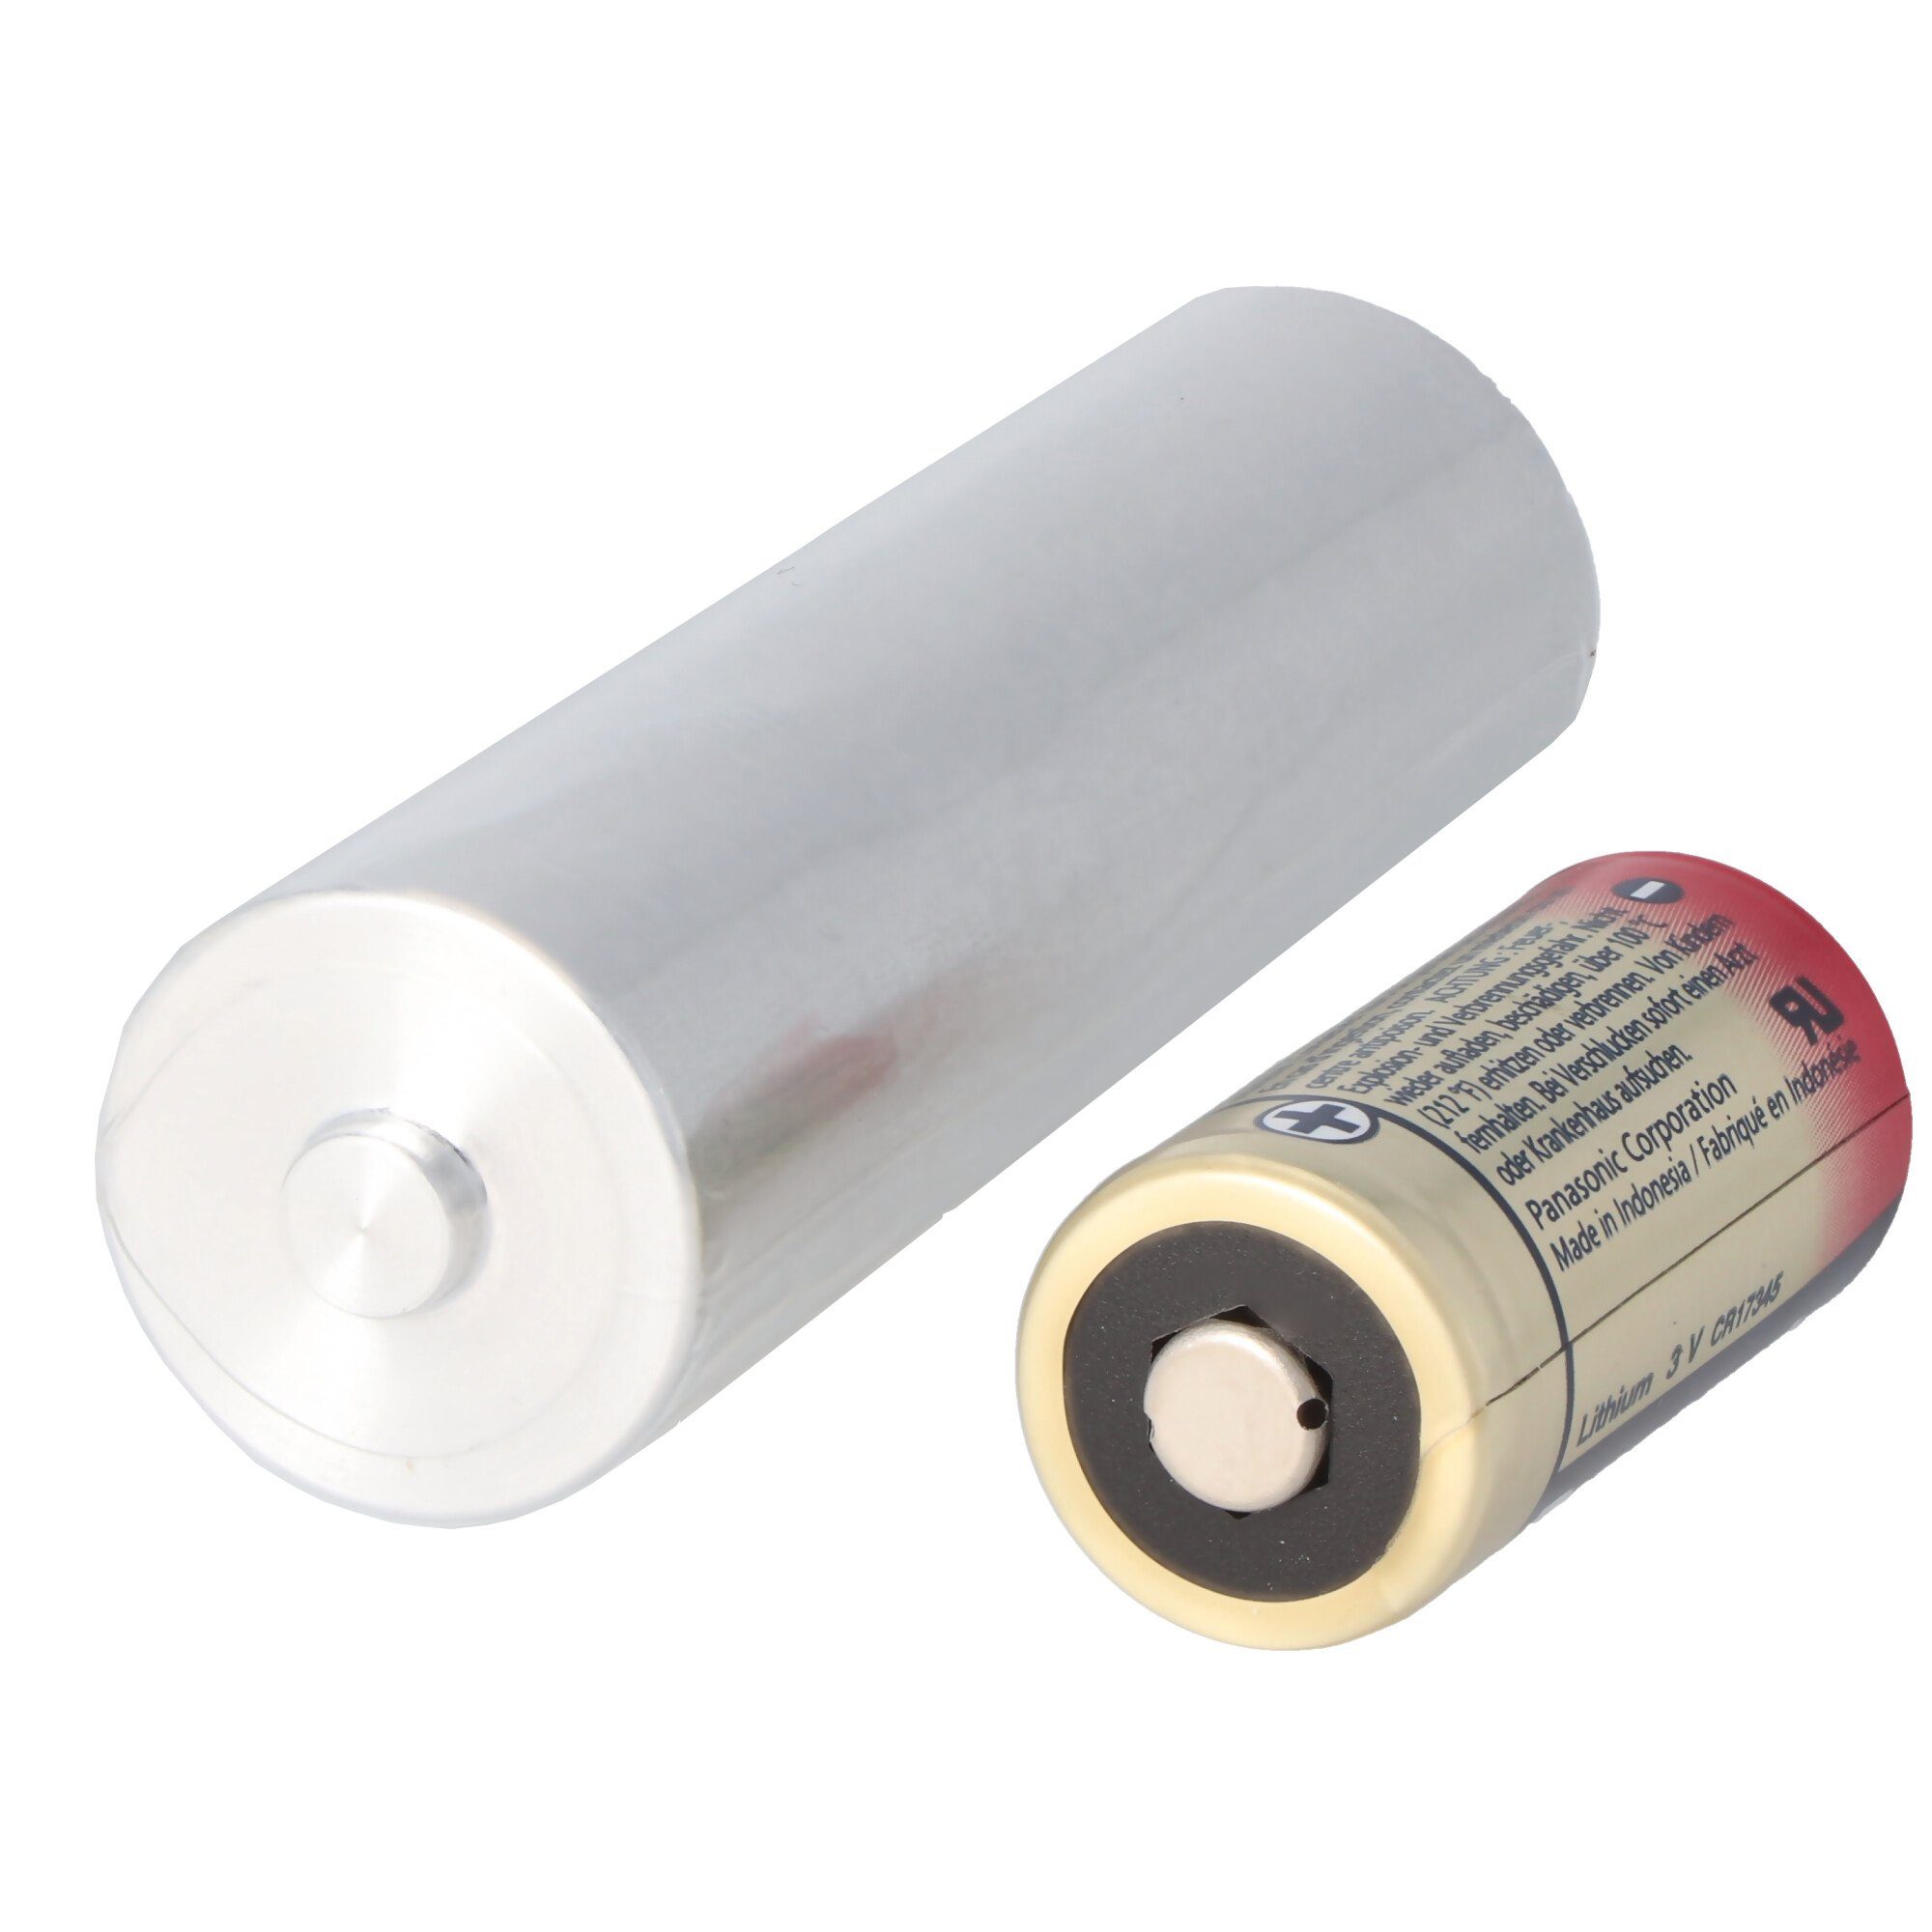 Batterie 3,0 2010, Stab-Batterie, Duplex Batterie AccuCell Adapter Vo 2R10 3010, 2R10R,